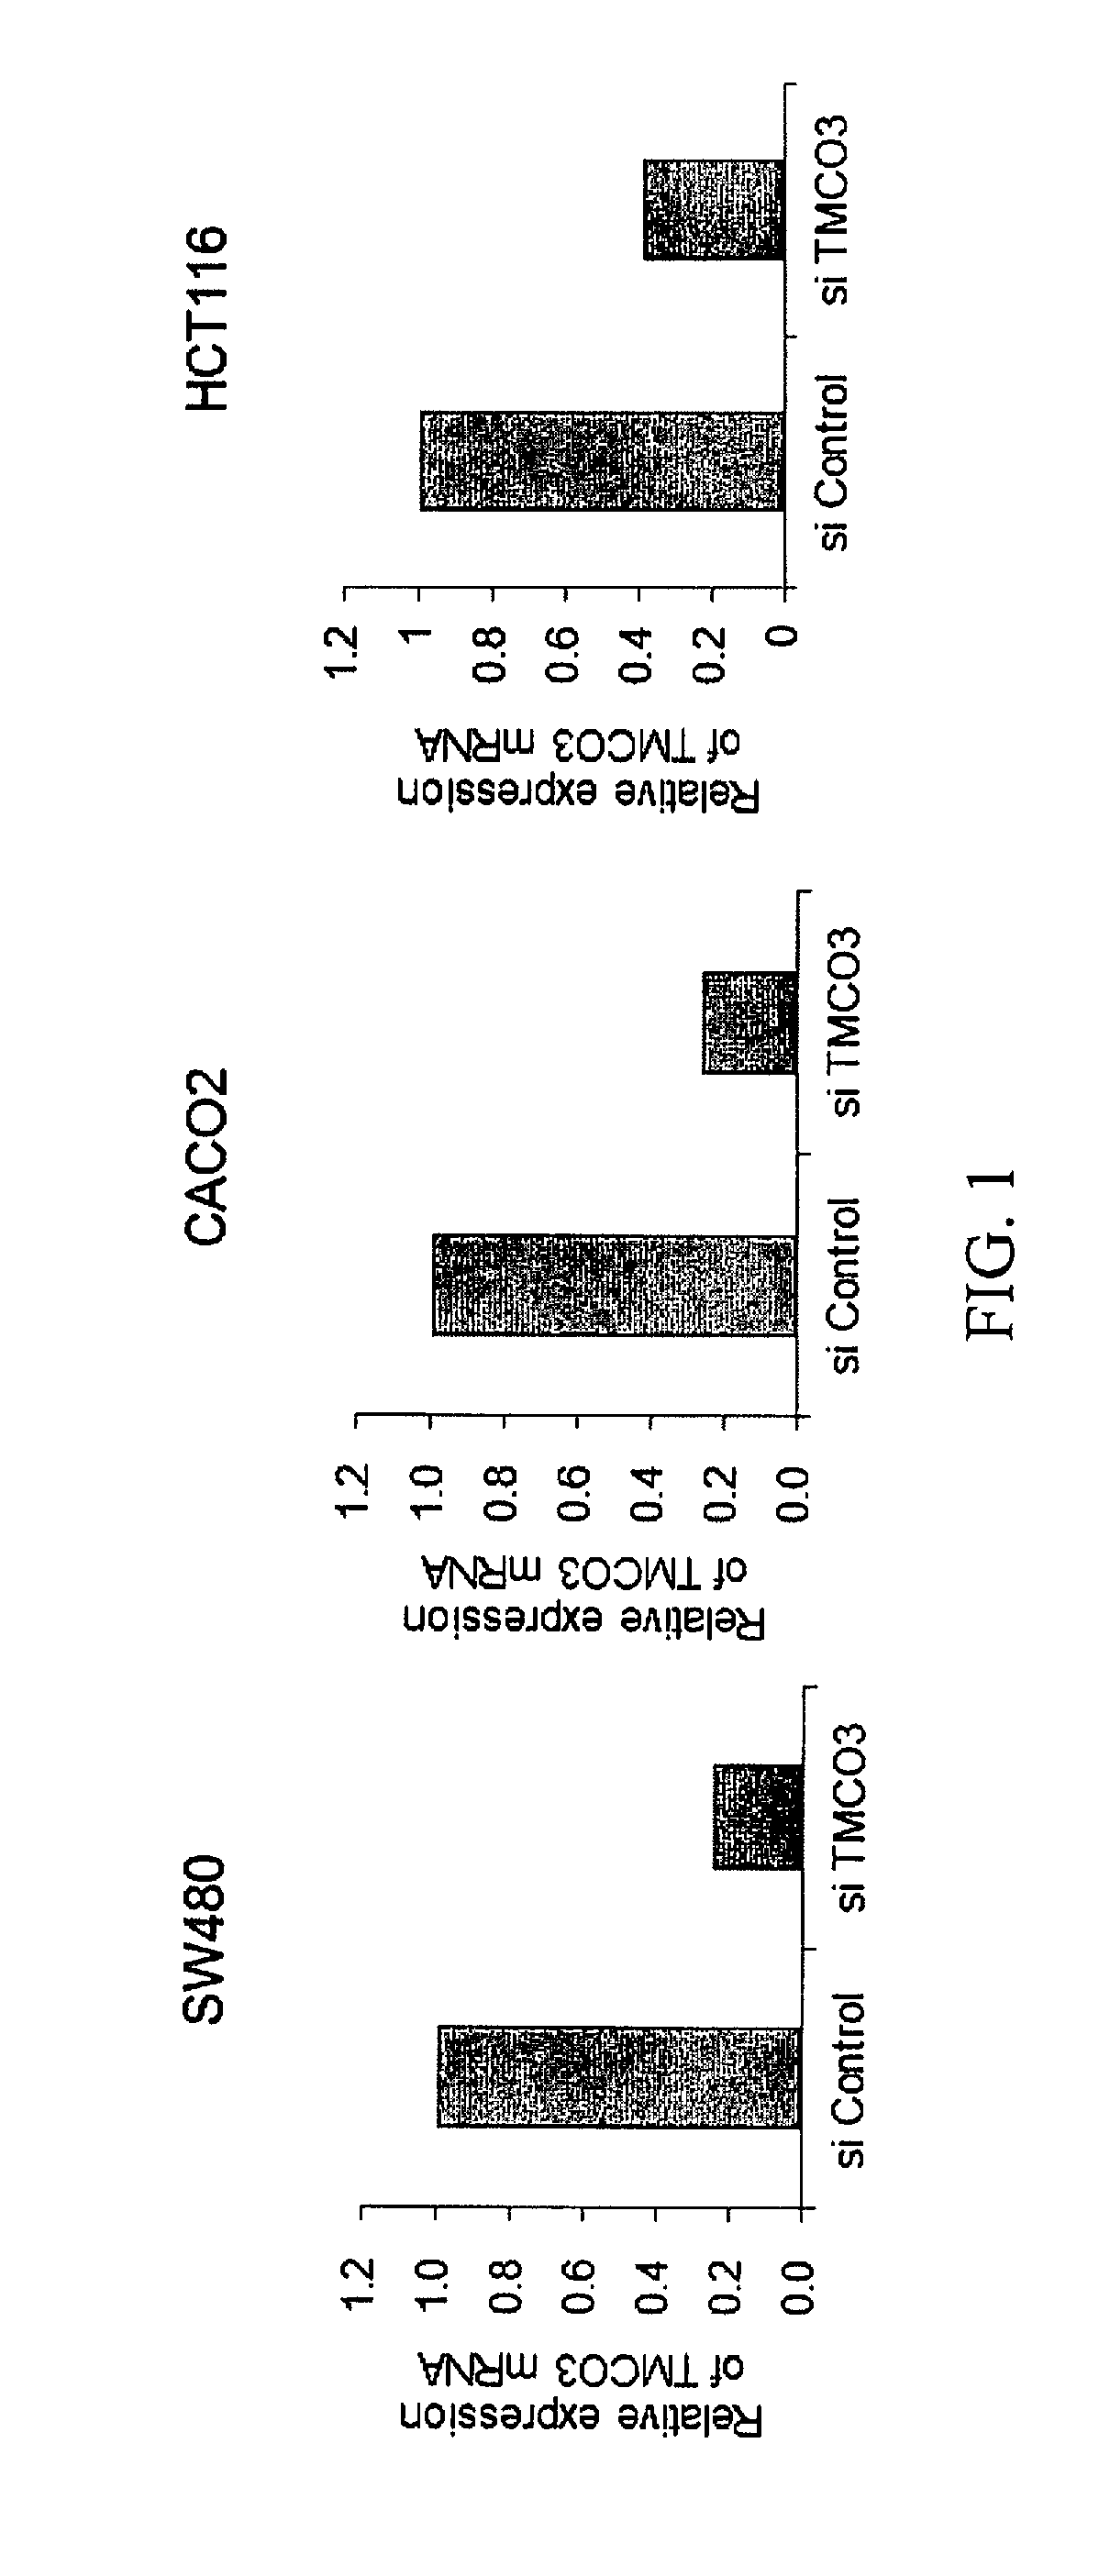 Methods and compositions involving transmembrane and coiled-coil domains 3 (tm-co3) in cancer